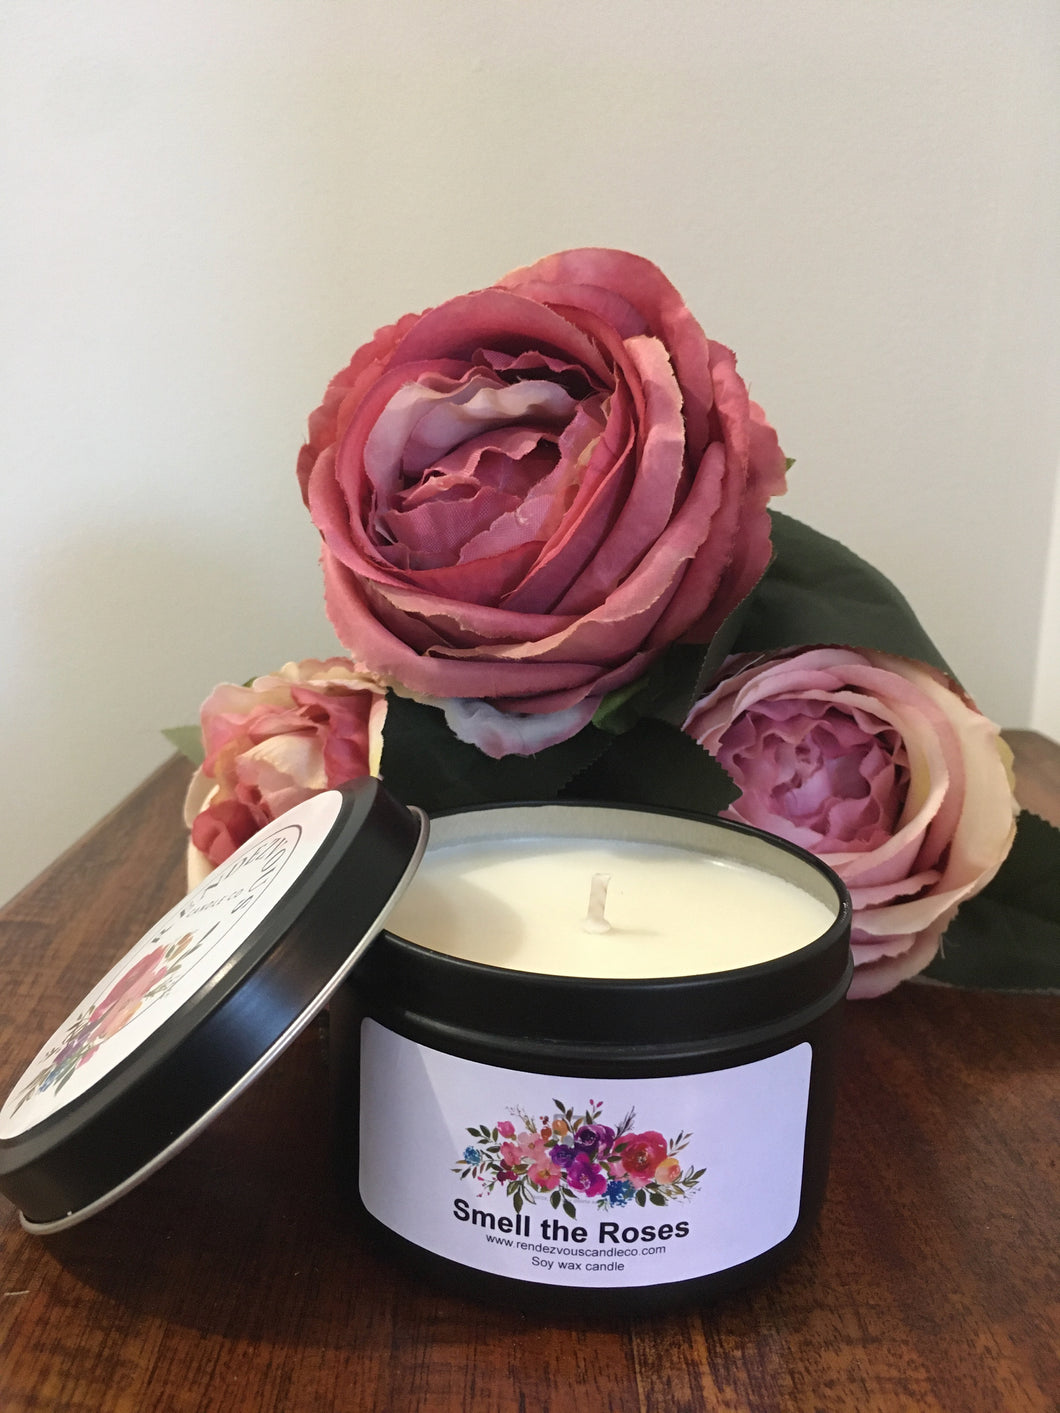 Smell the Roses Scented Soy Candle